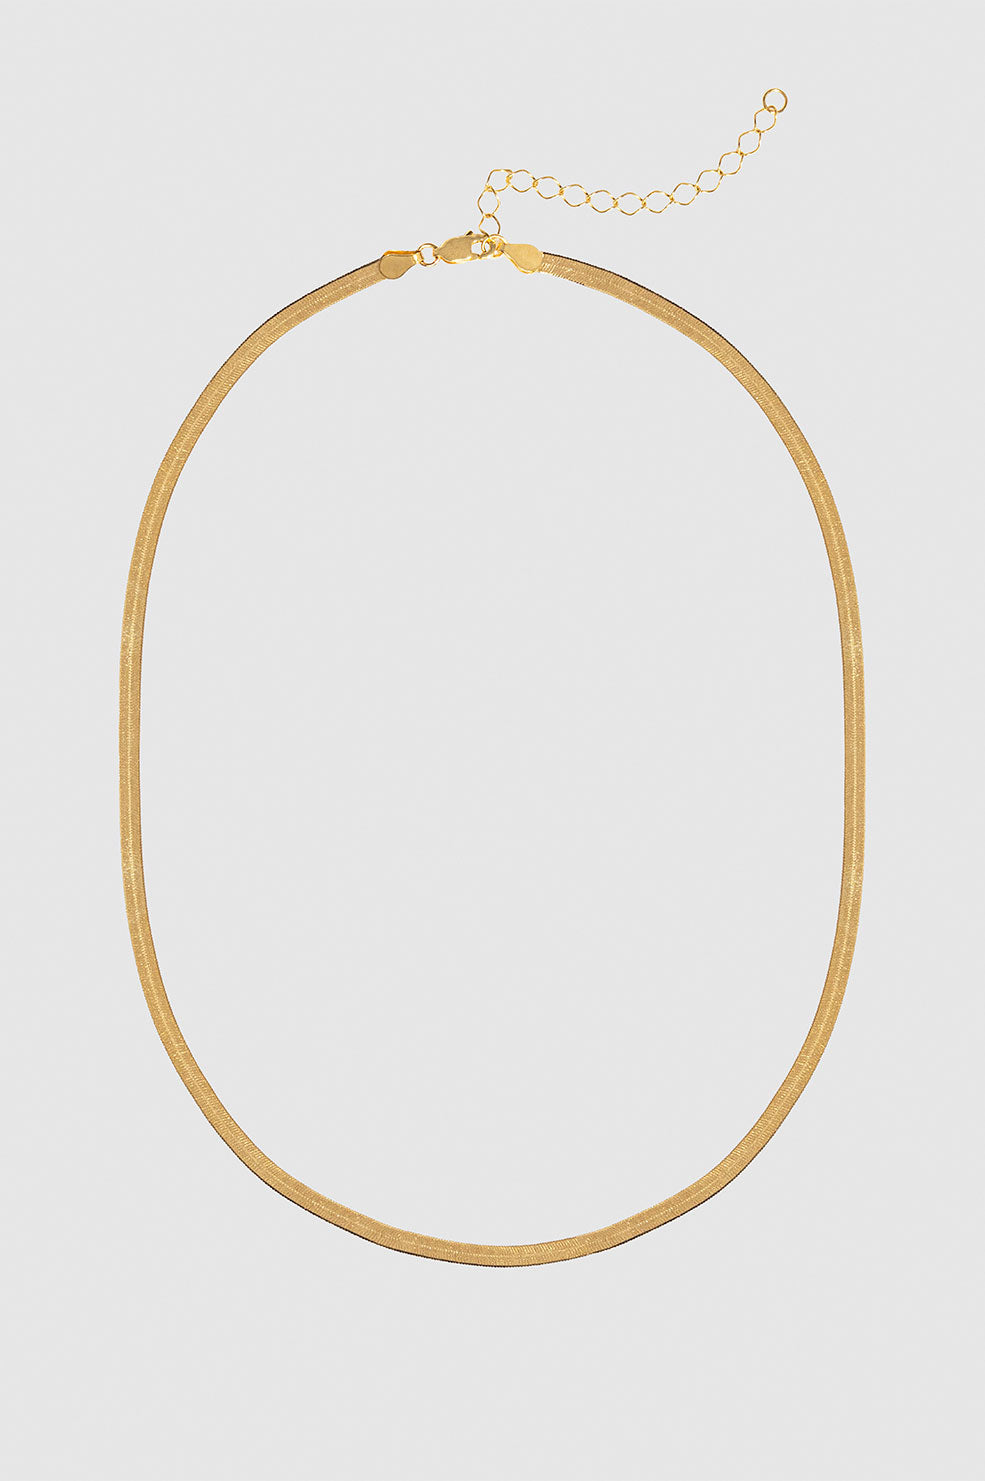 ANINE BING Ribbon Coil Necklace - Gold - Front View